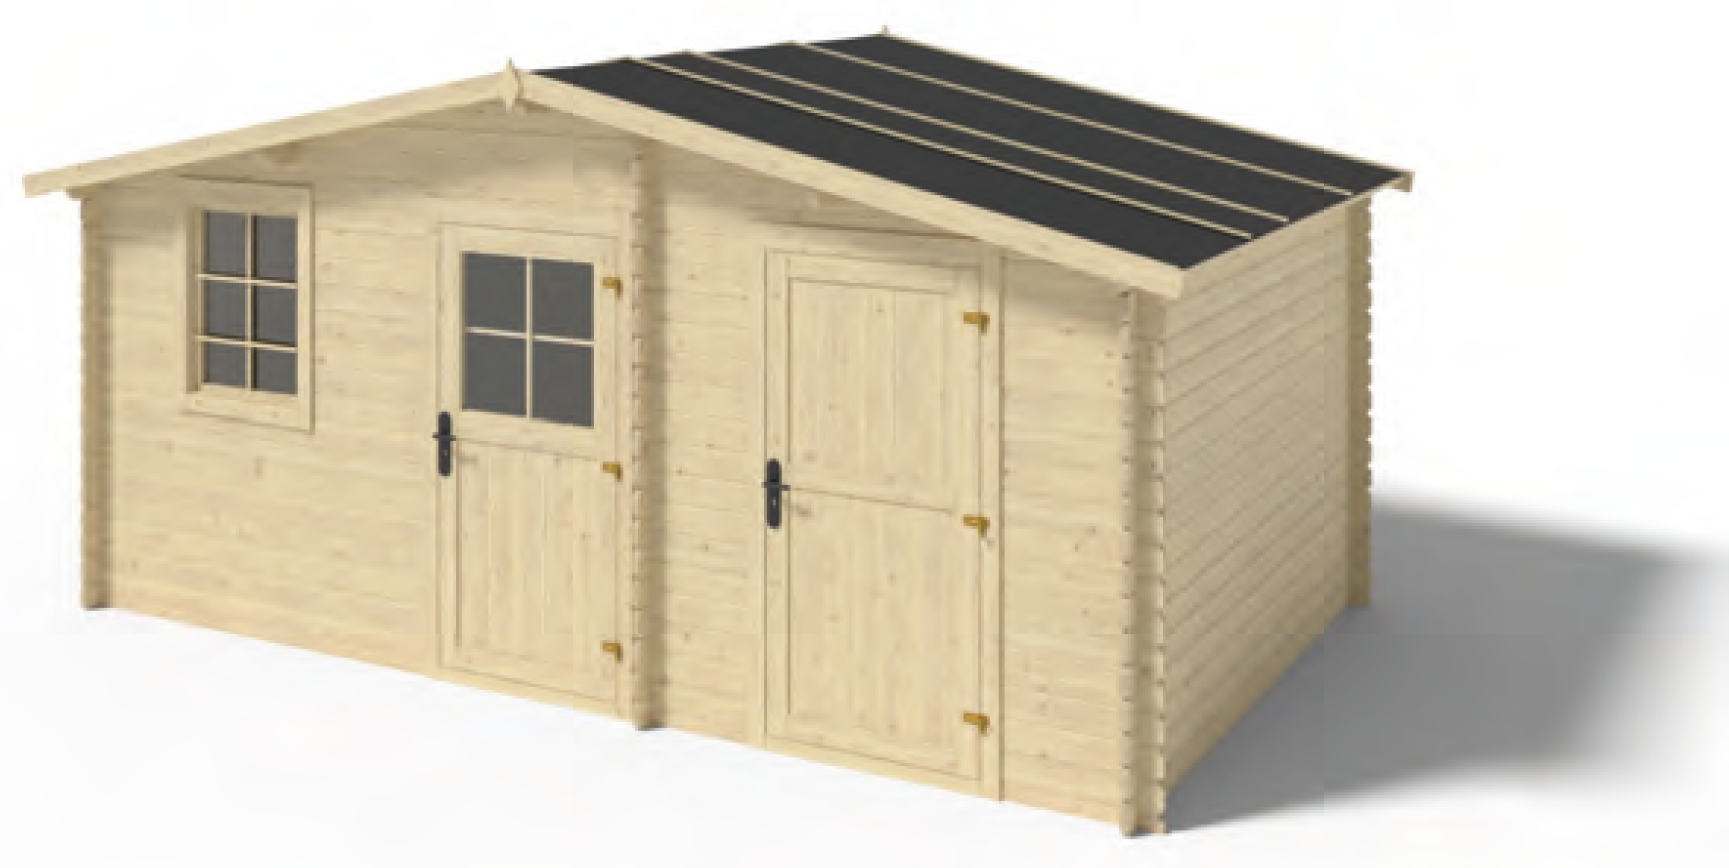 Mont Fort Garden Shelter with porch option 528 x 323 x 246 cm